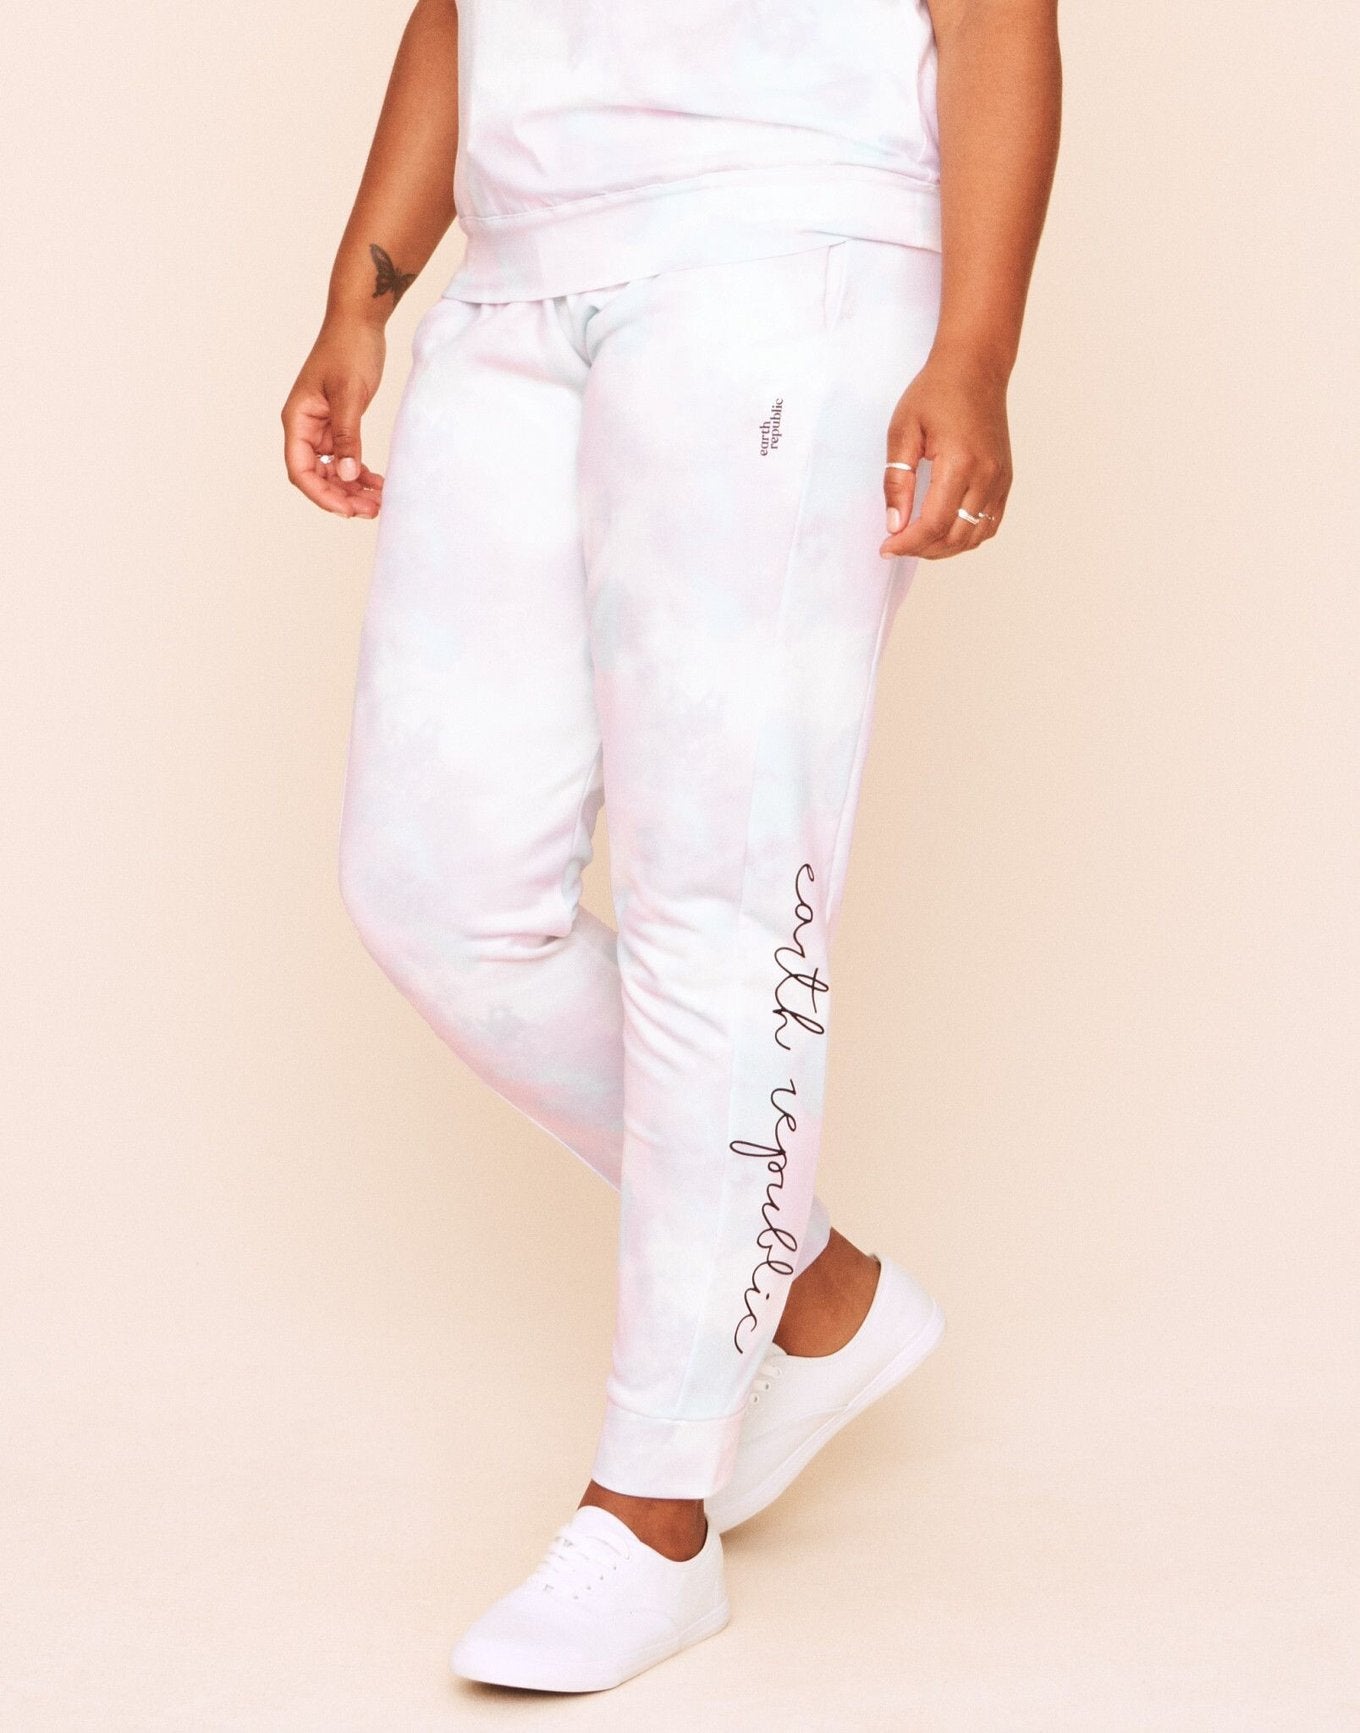 Earth Republic Shawn Jogger Pant Joggers in color Tie Dye (Athleisure Print 2) and shape jogger